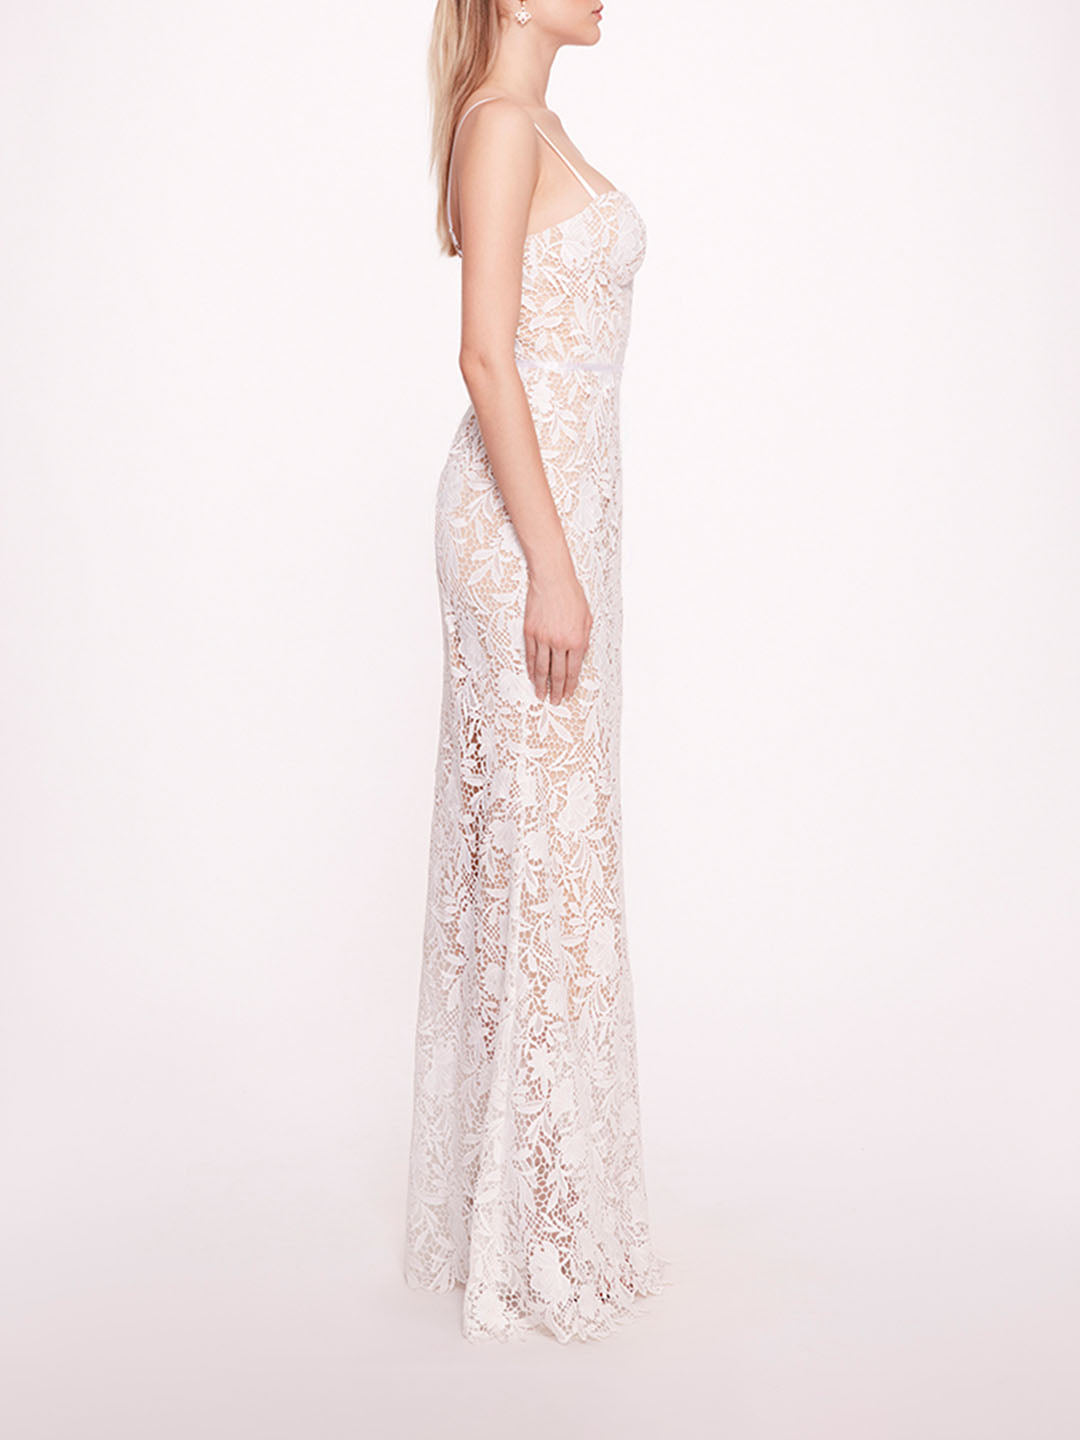 Lace Mermaid Gown | Marchesa